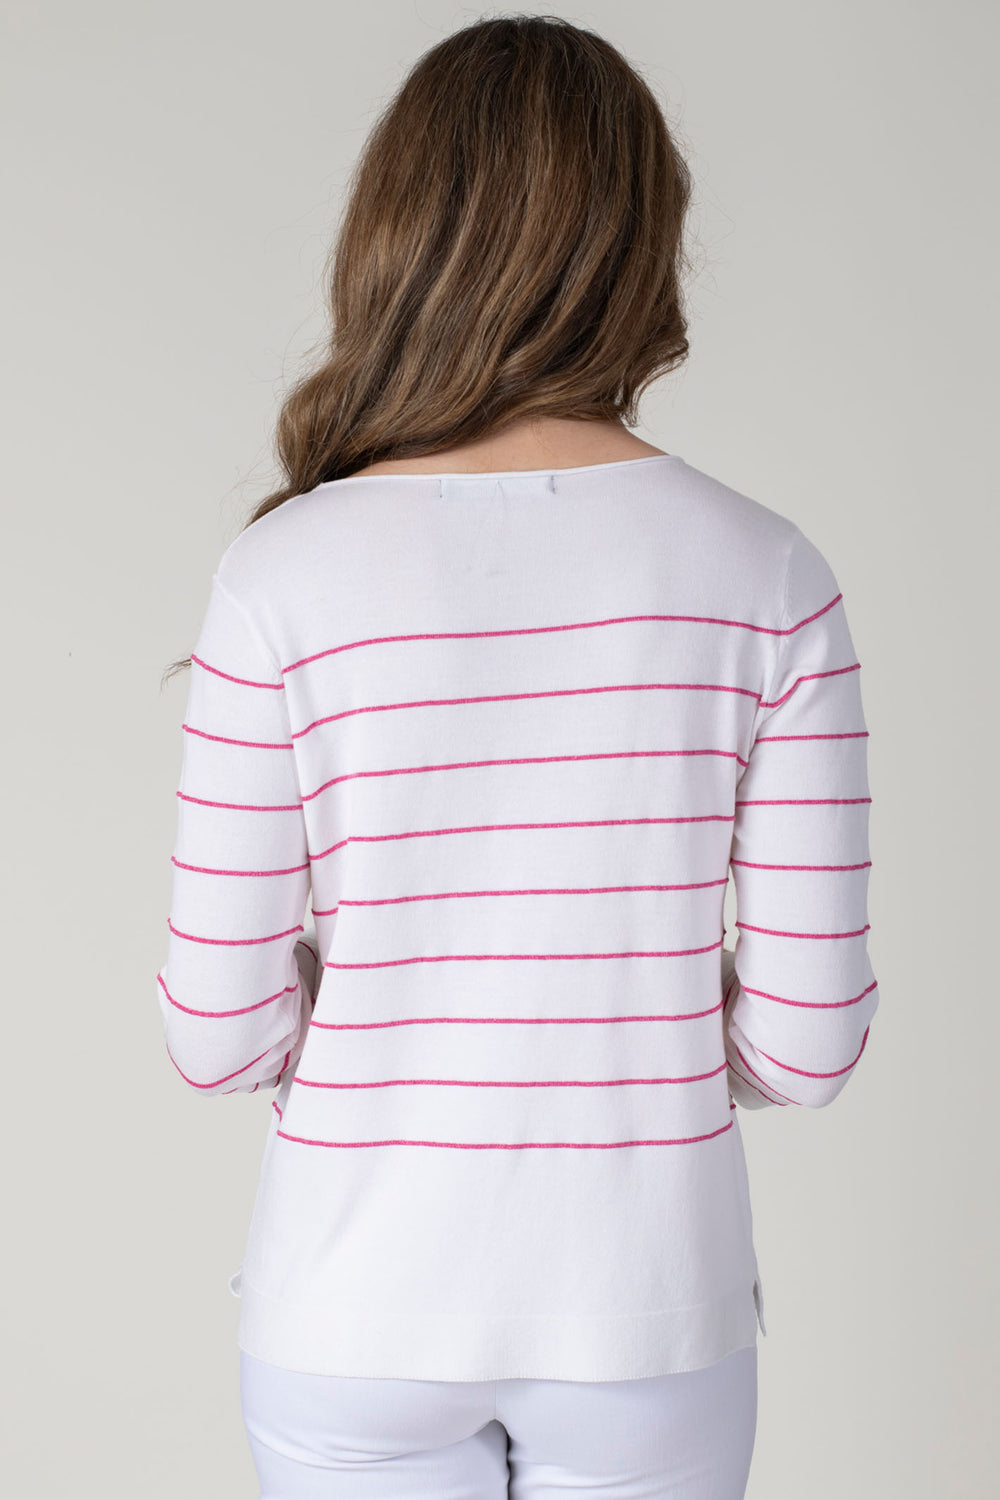 Jessica Graaf 27164 White Fuchsia Pink Stripe Long Sleeve Jumper - Experience Boutique